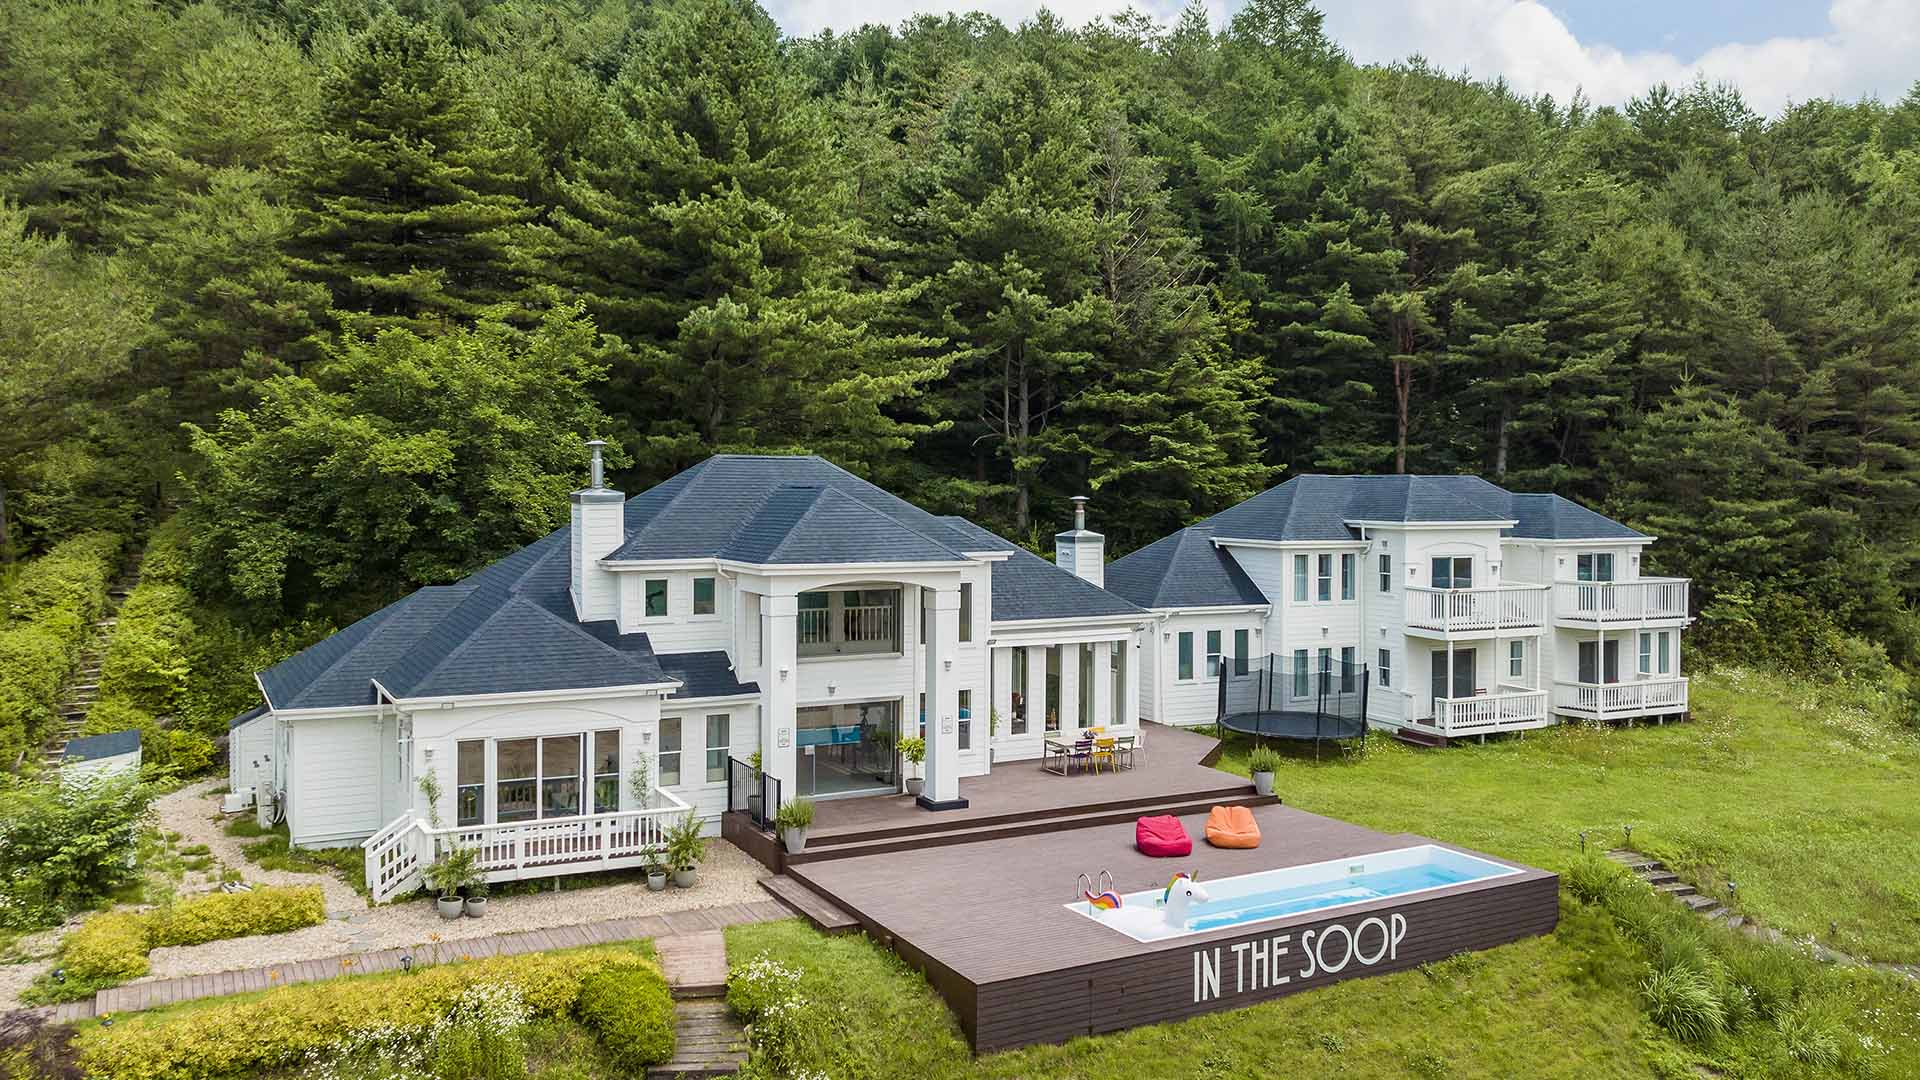 You Can Now Spend a Night at the South Korean Estate Where BTS Filmed 'In the Soop' Thanks to Airbnb